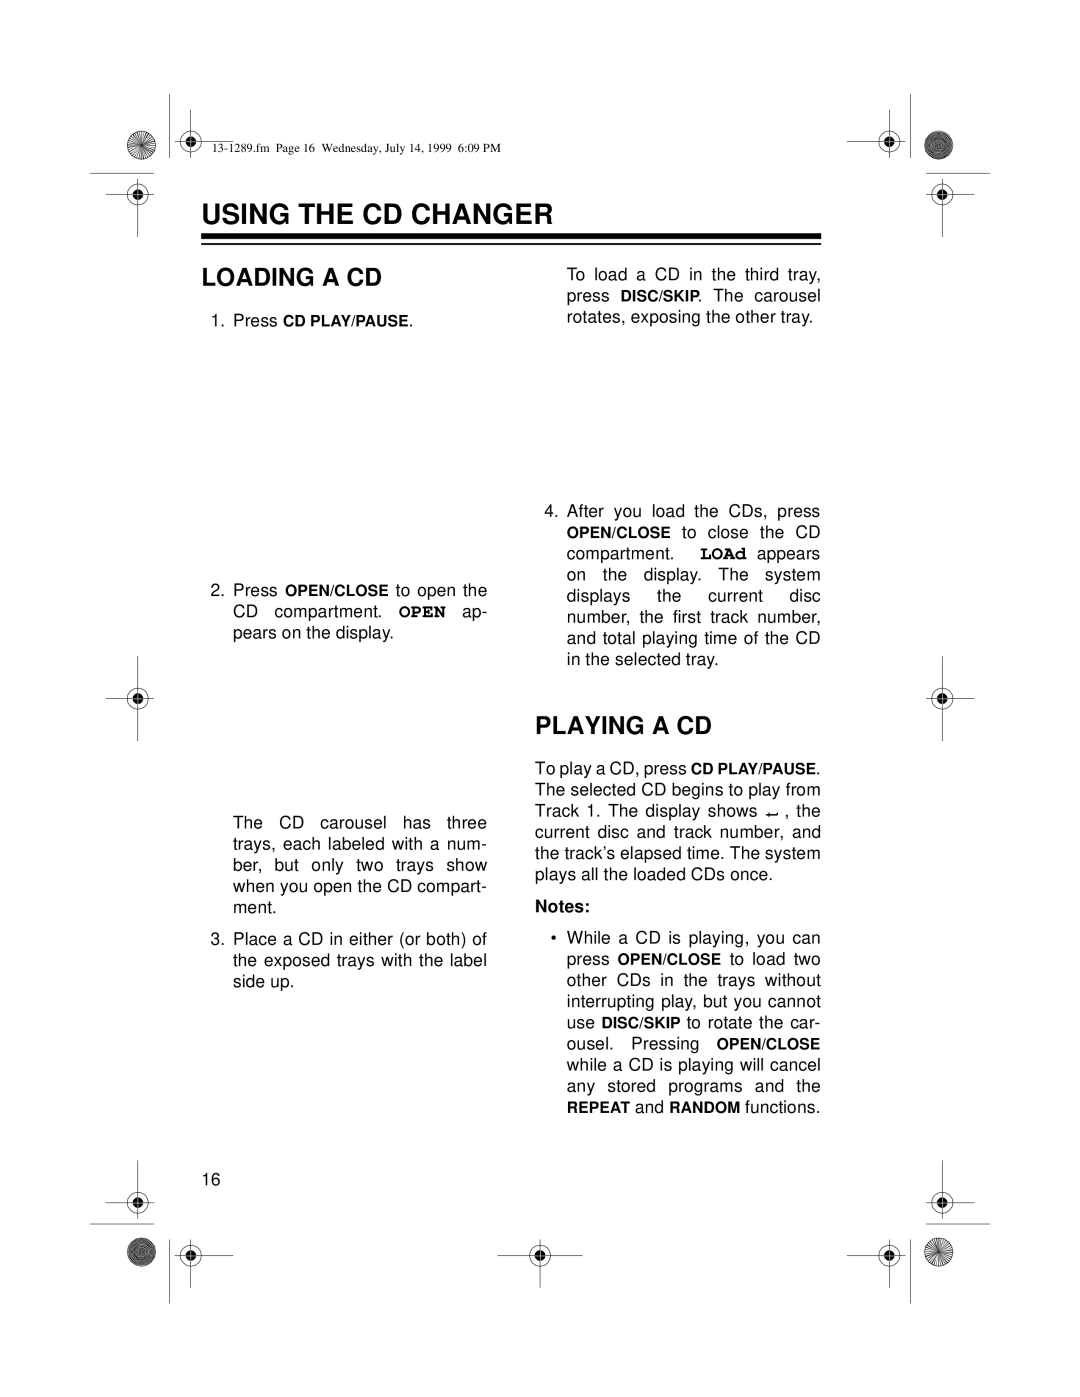 Optimus 742 owner manual Using The Cd Changer, Loading A Cd, Playing A Cd 